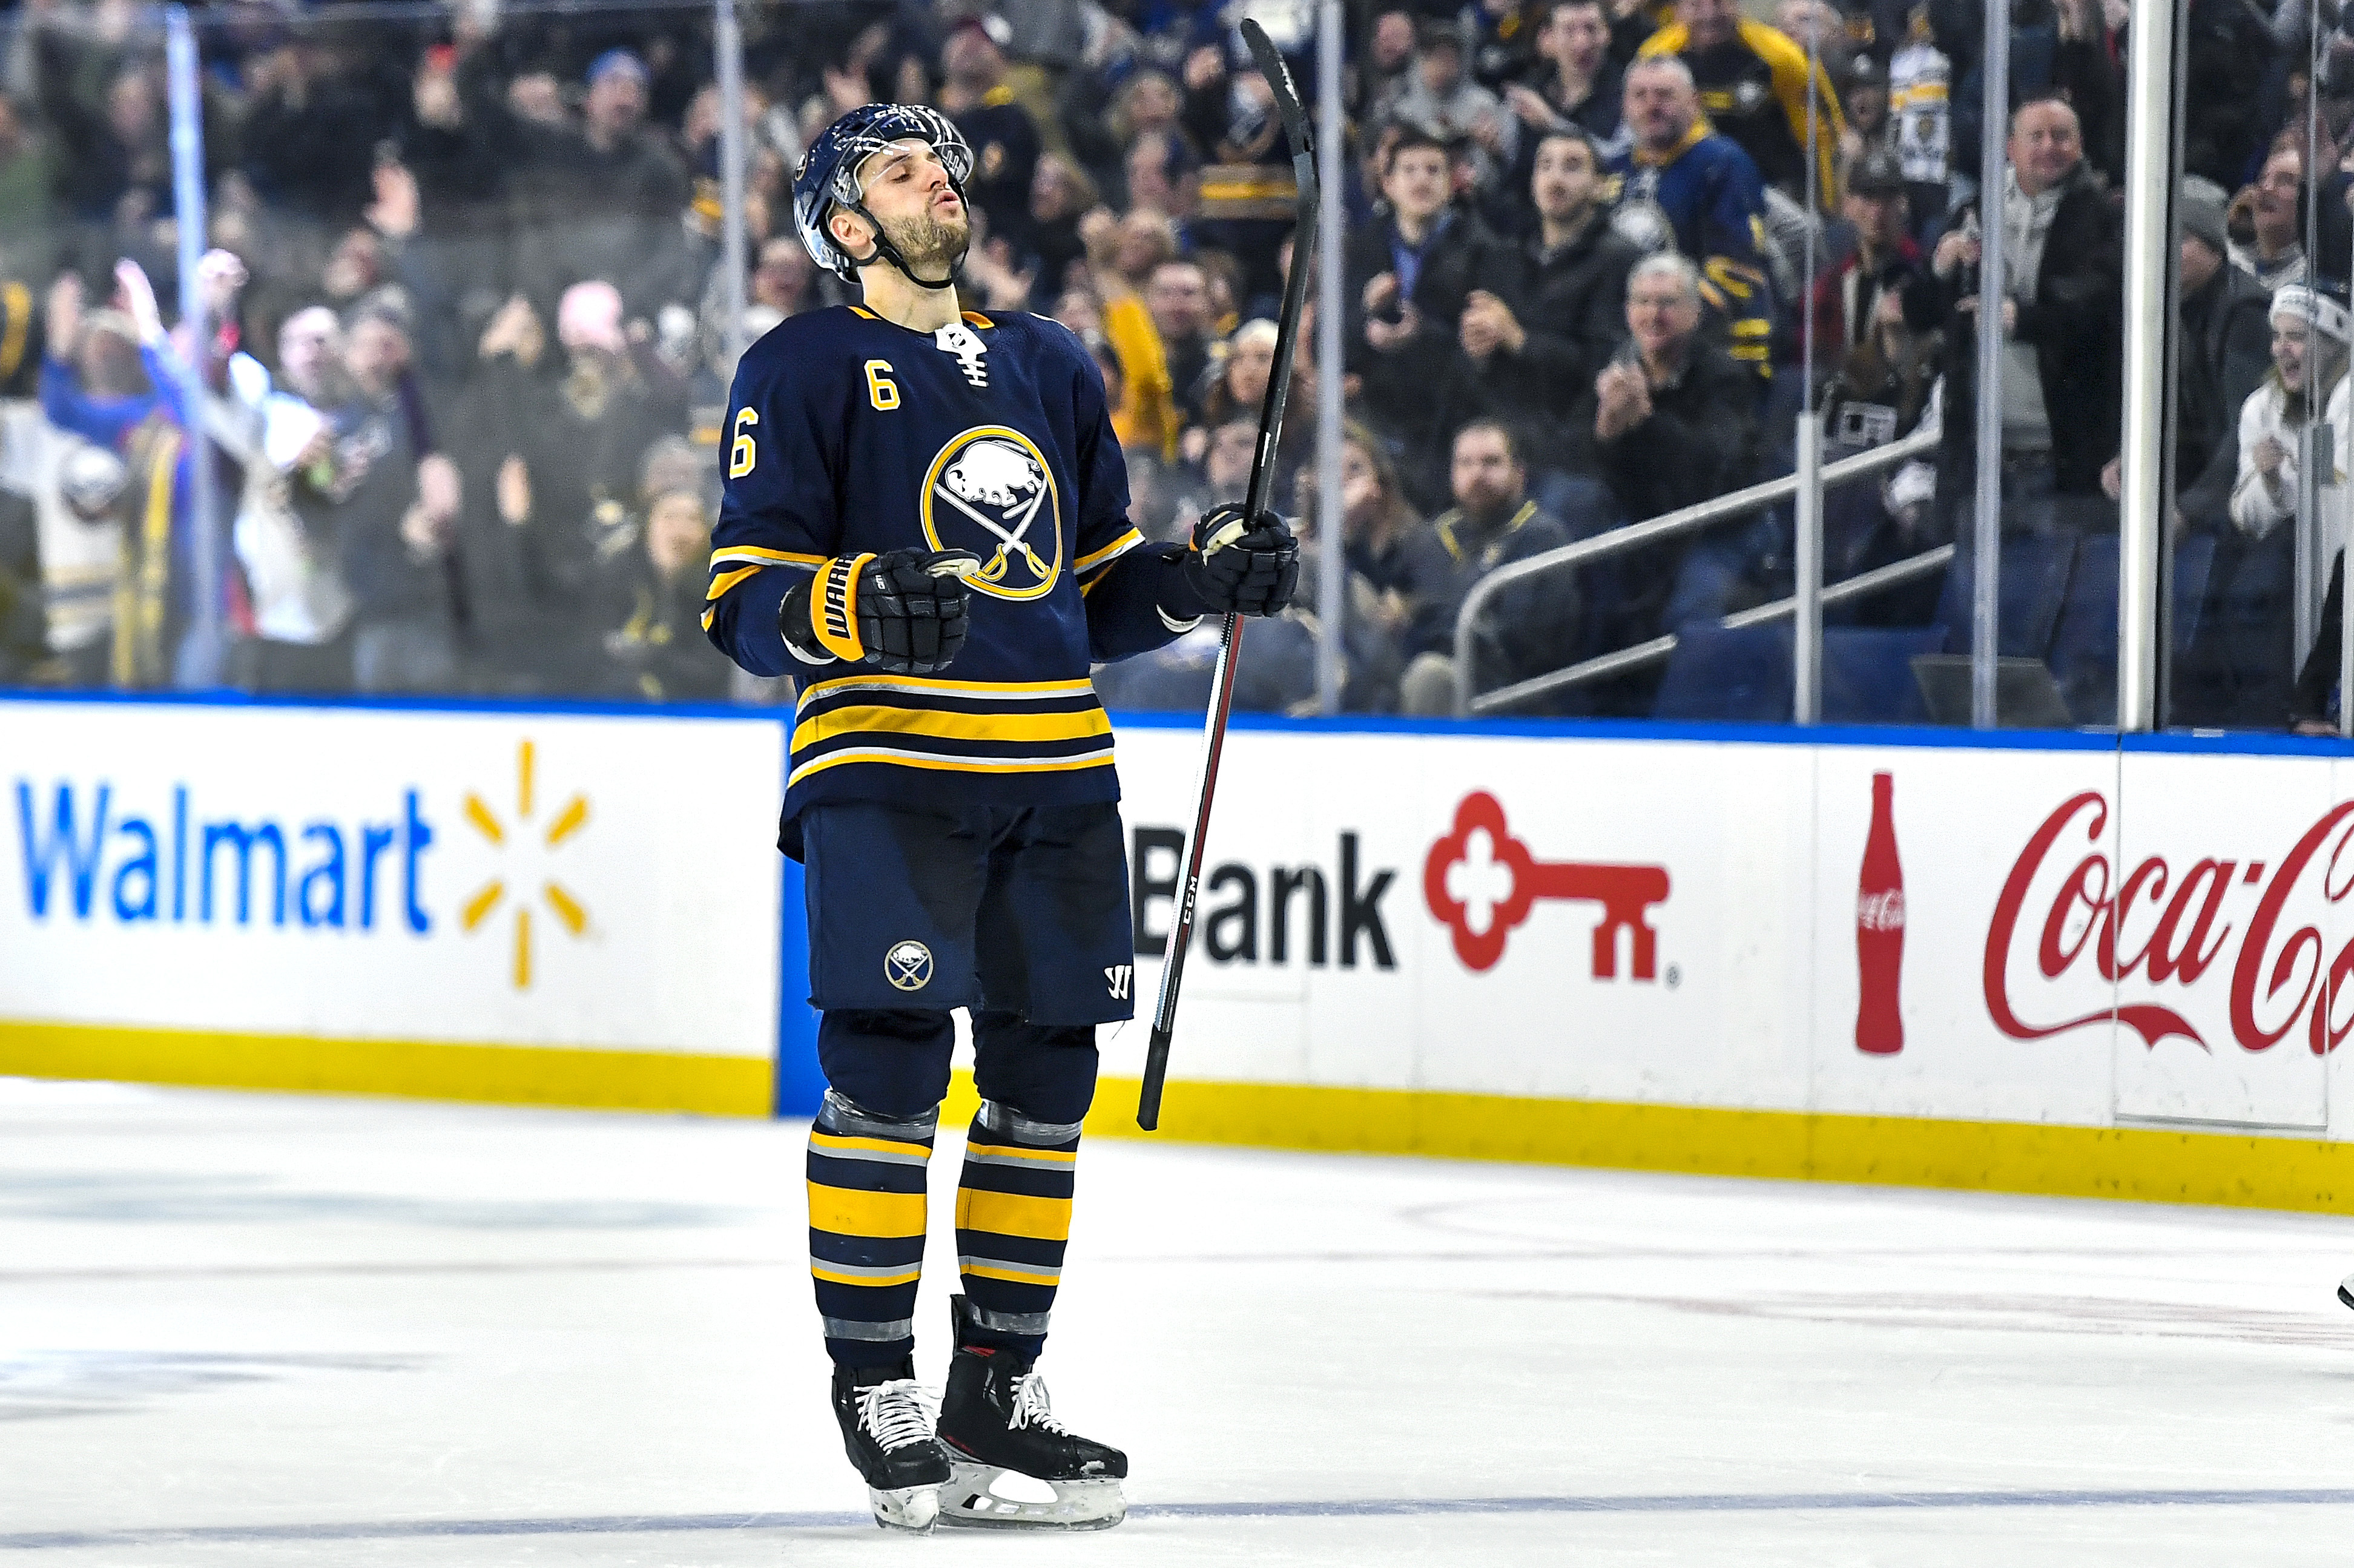 Sabres end 3-game losing streak with 3-2 win over Kings